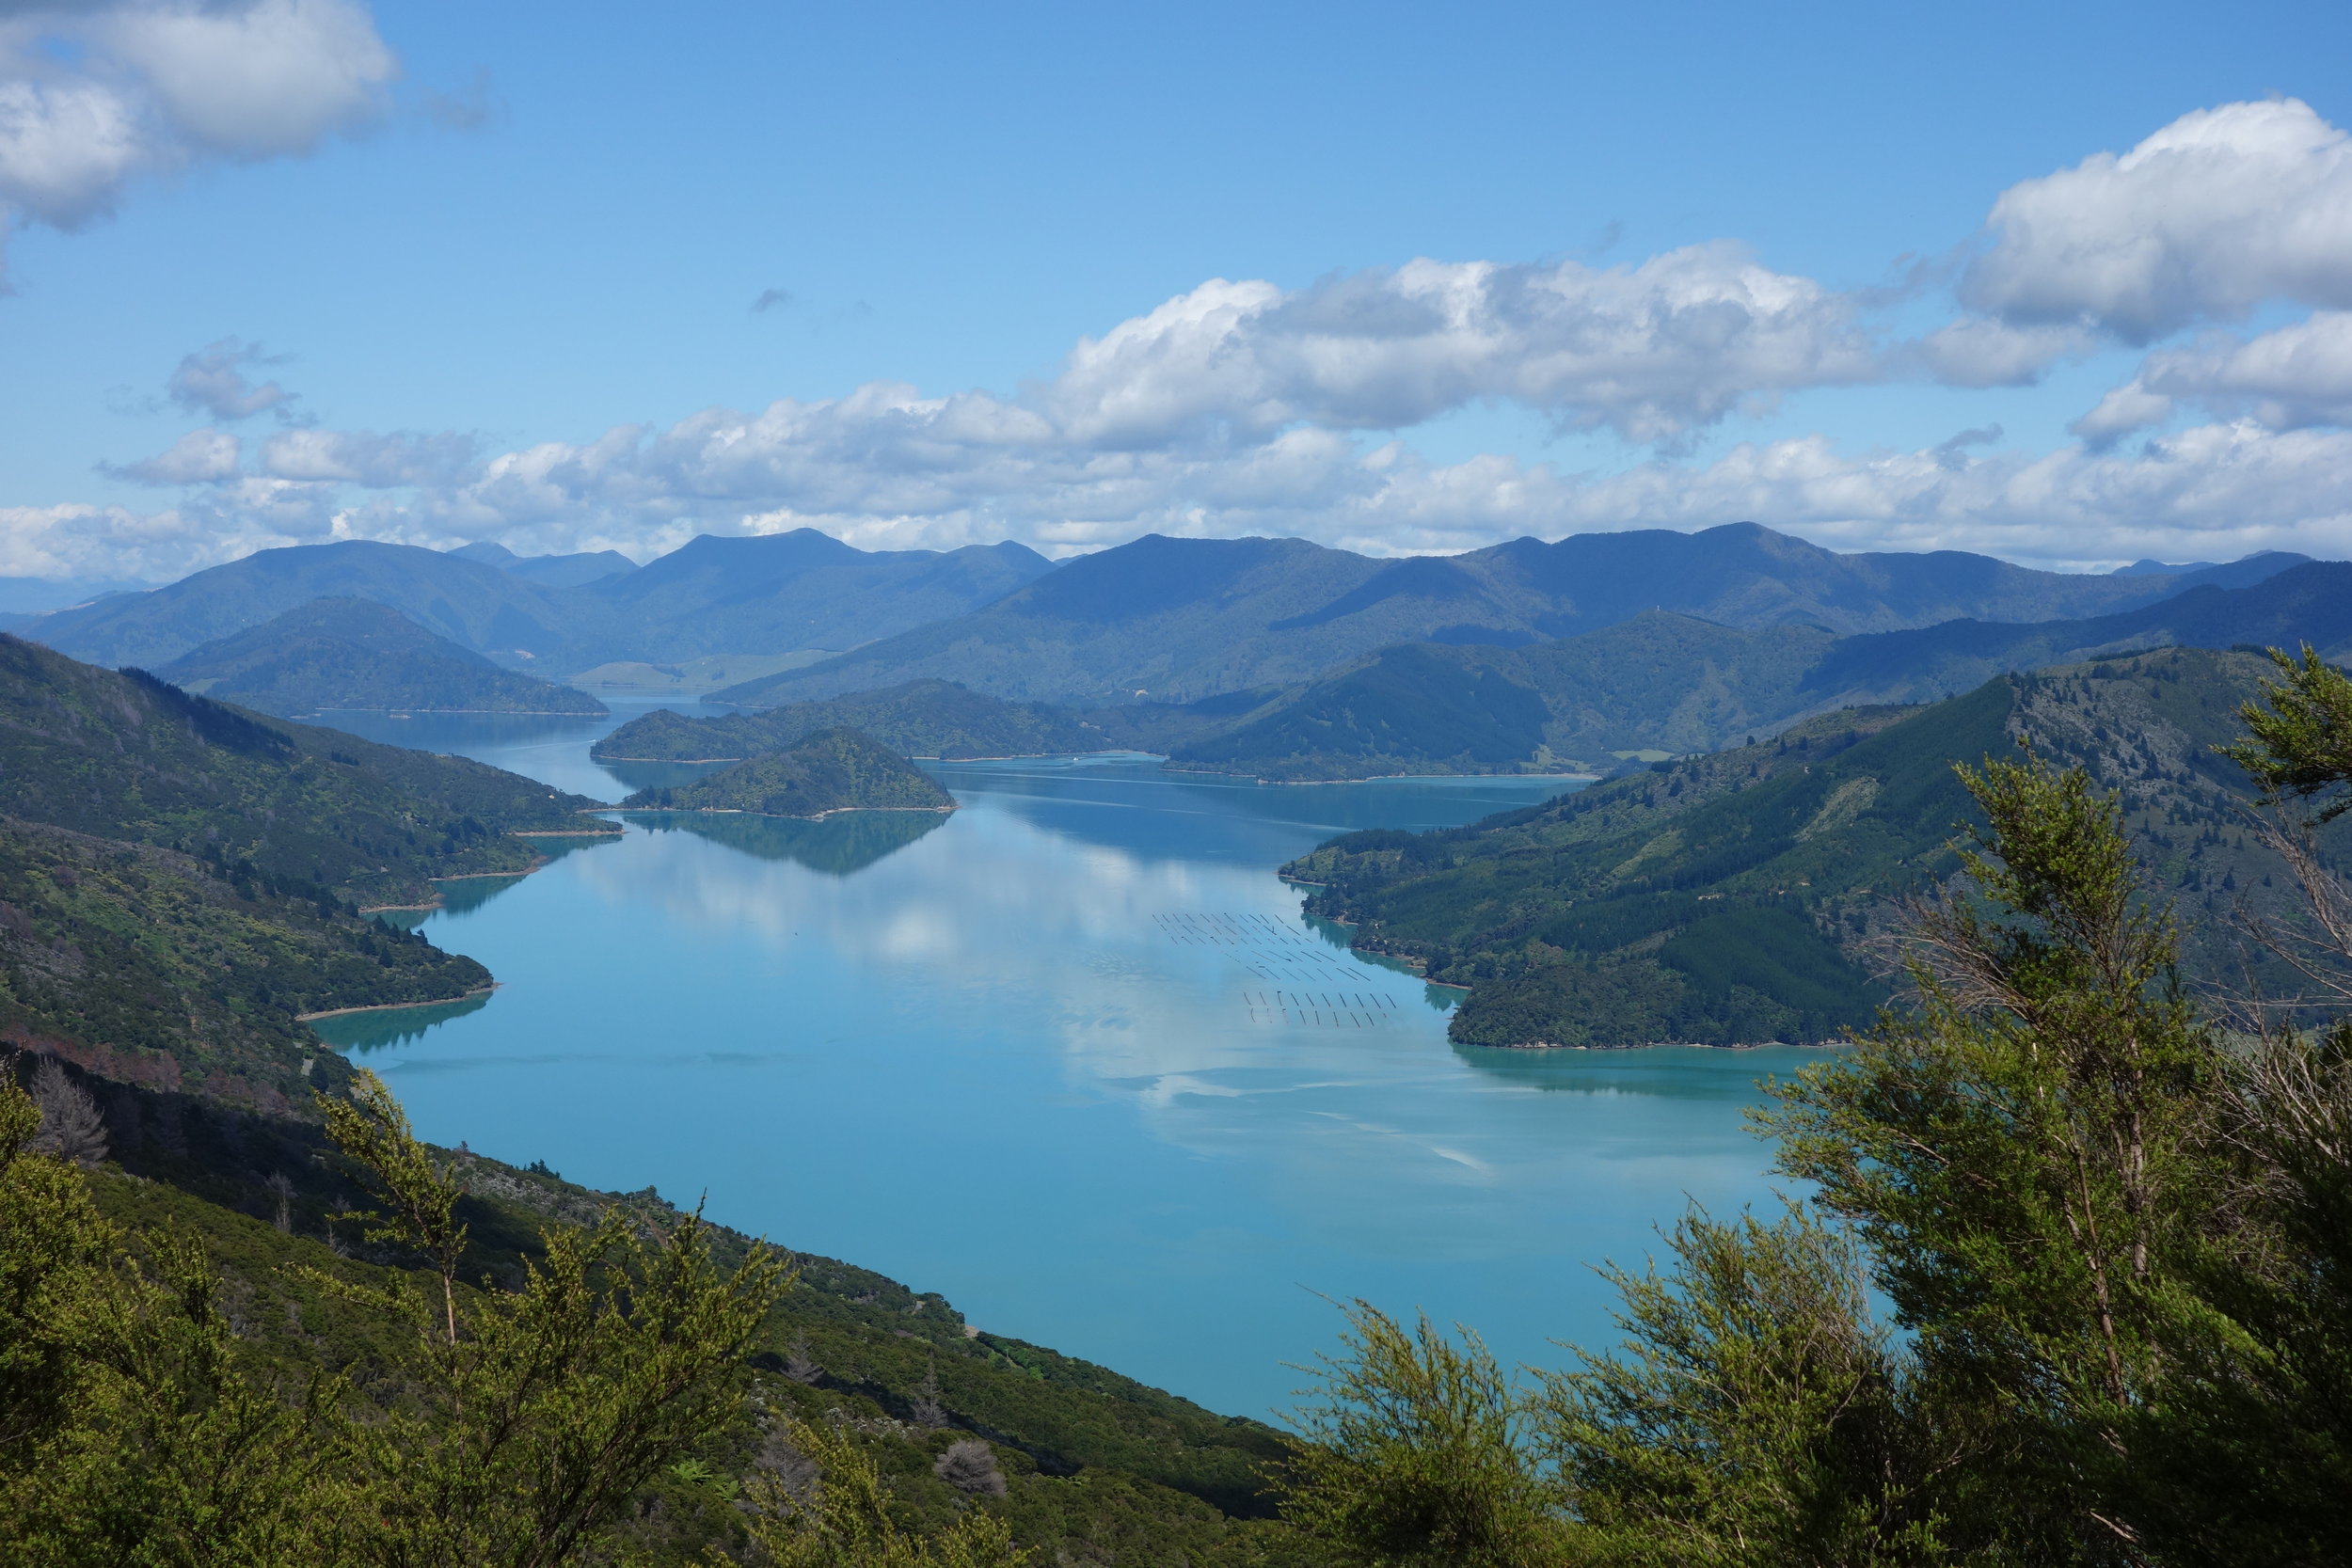 The Queen Charlotte Track rises and falls along its route, but climbs to ridgelines and descents to isolated beaches are moderate.